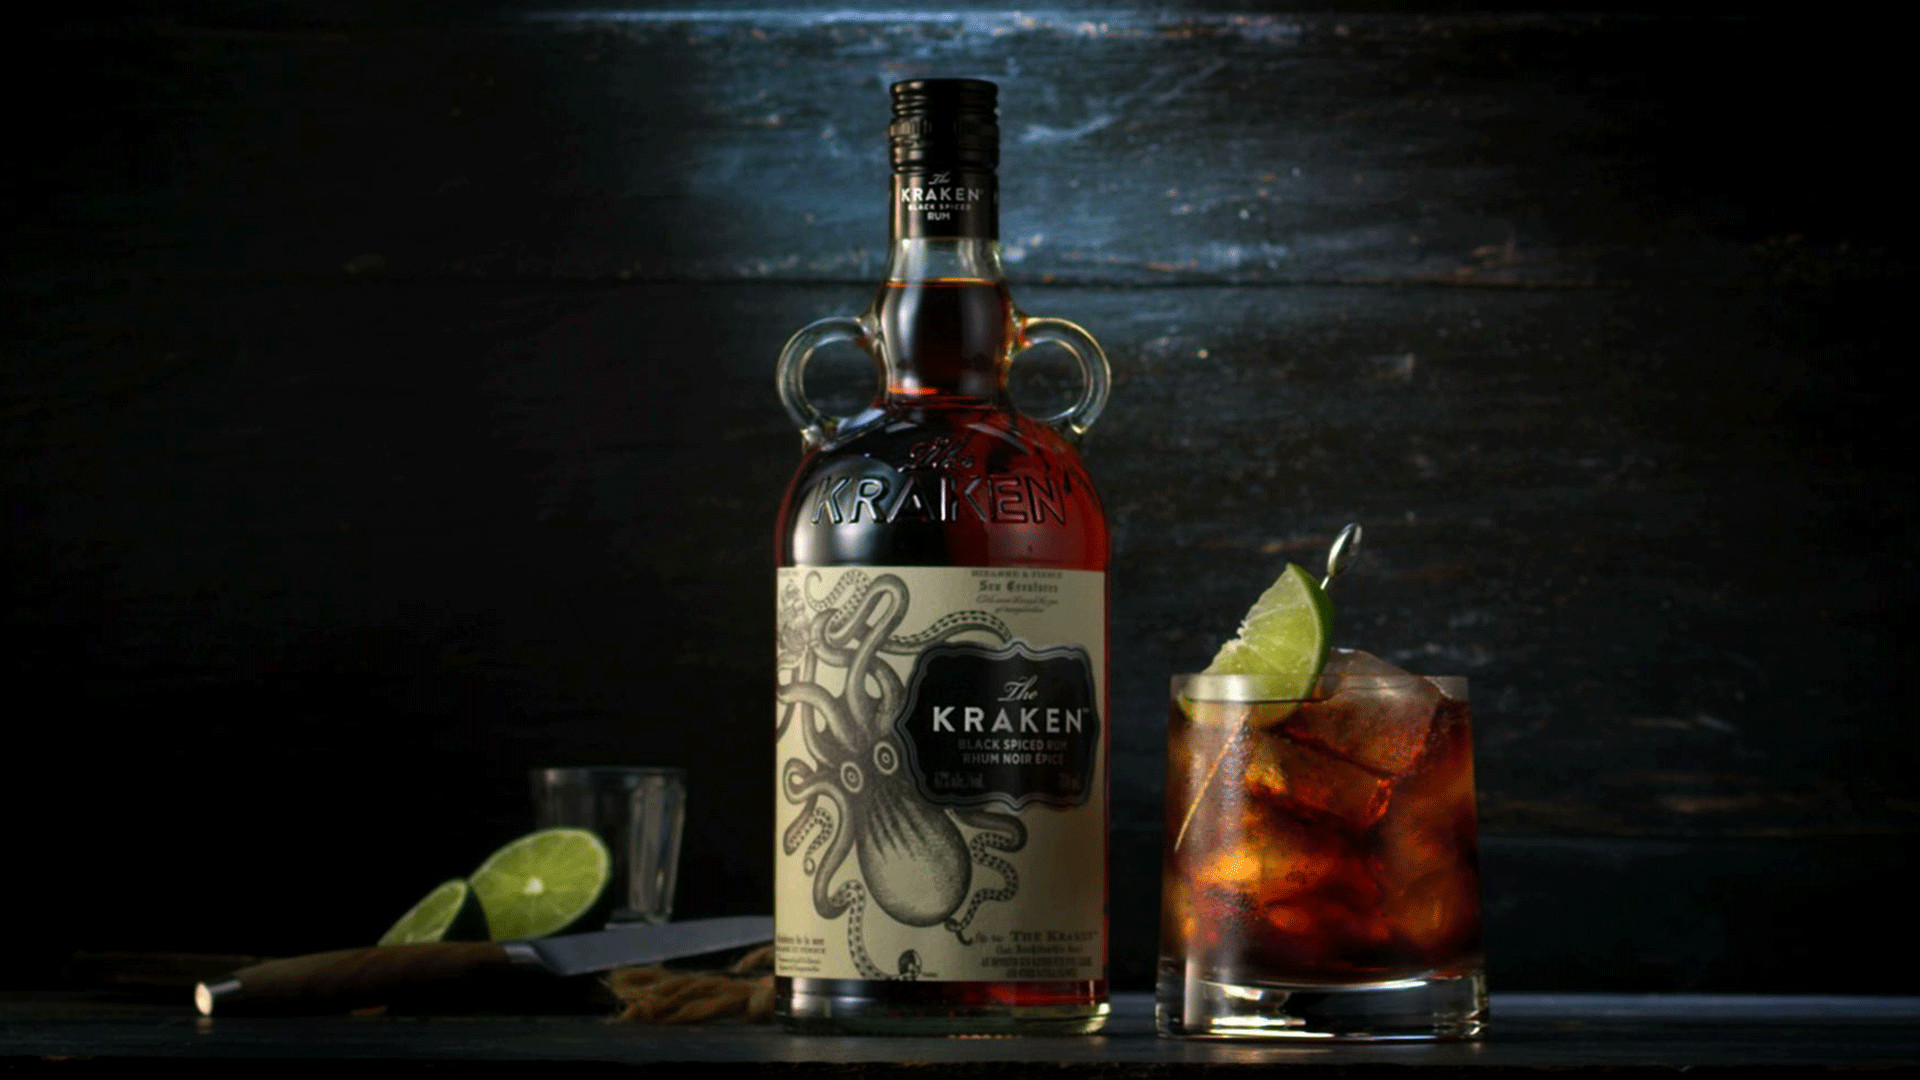 The Best Three Cocktails To Make With The Kraken Black Spiced Rum Recipes Foodism To